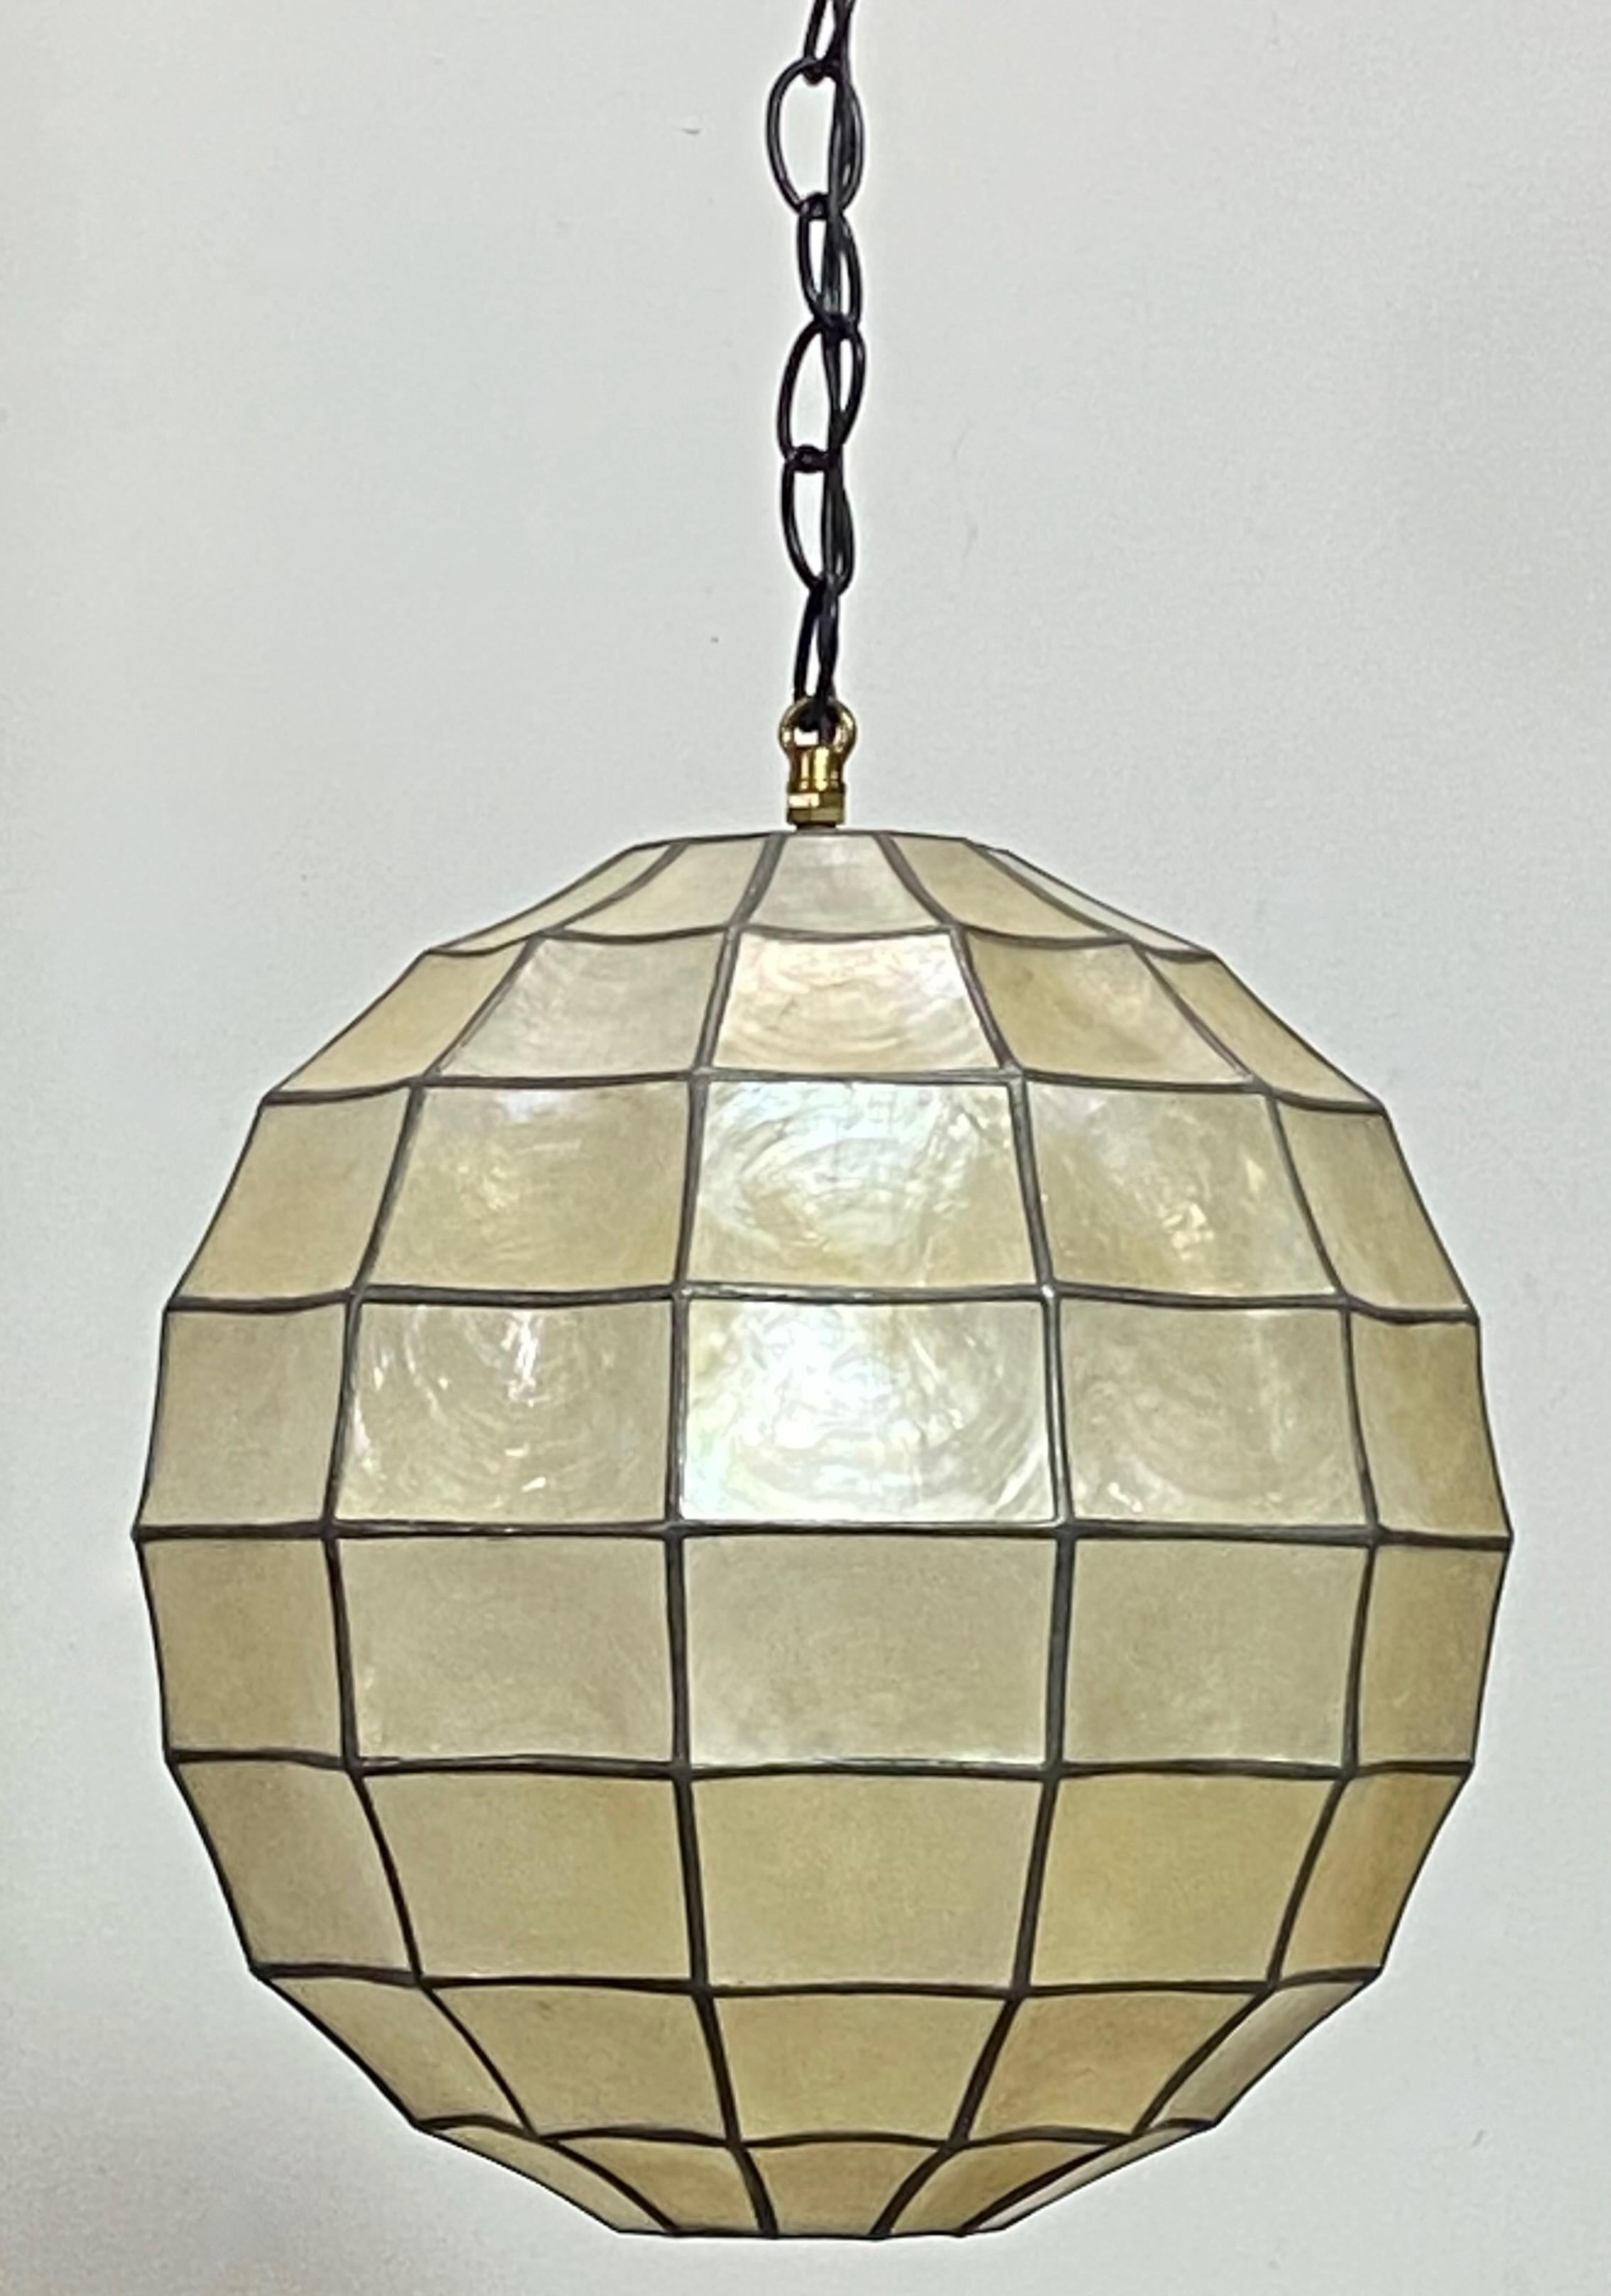 Mid-Century Modern round shape Capiz shell hanging pendant light fixture.
Recently cleaned and re-wired. Shown in photos with a 60 watt LED light bulb.
In excellent vintage condition and ready to install.
We can shorten the chain to buyers